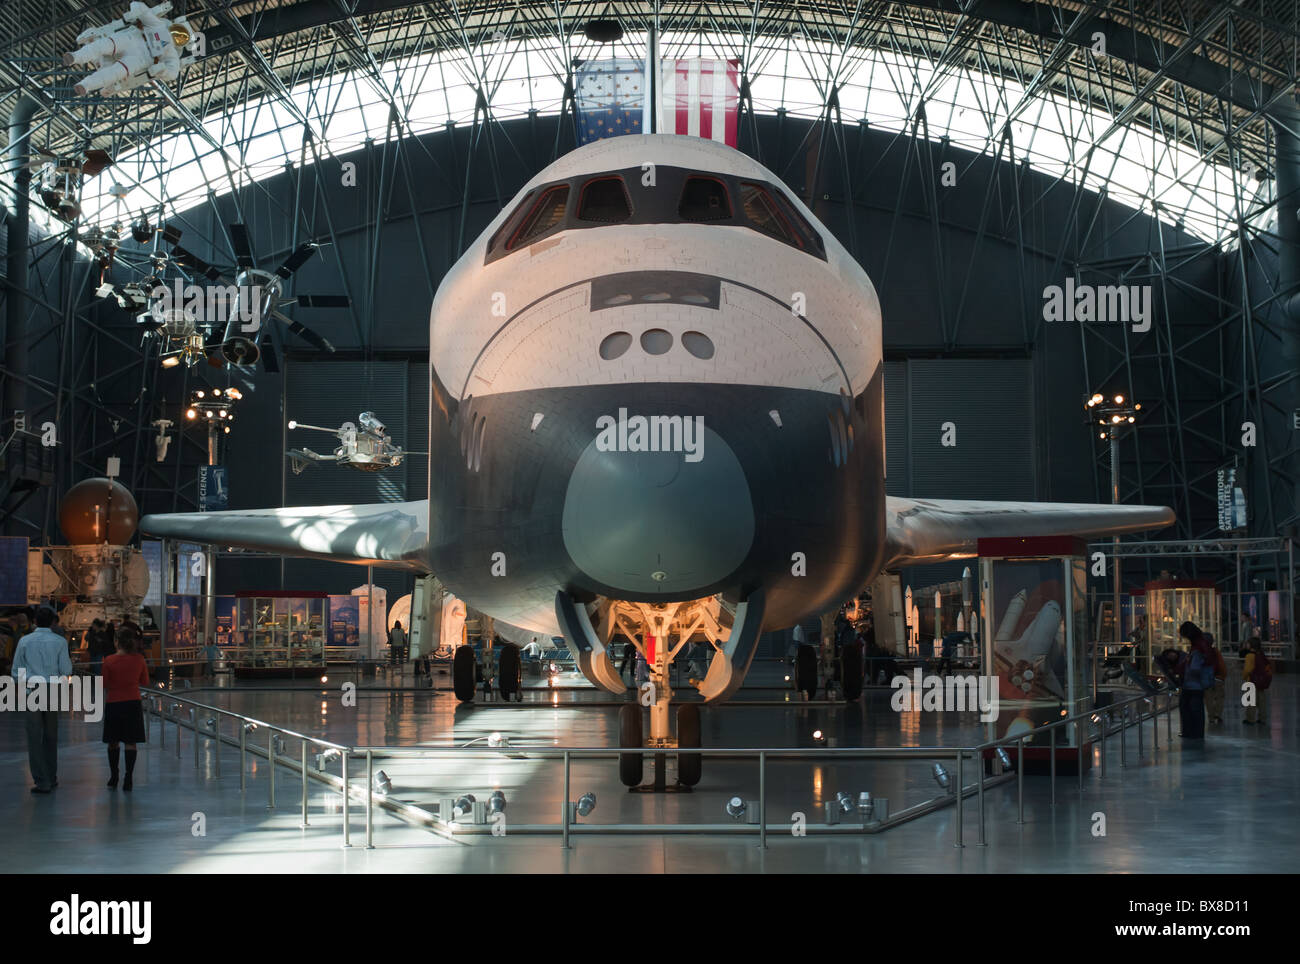 Space Shuttle Enterprise at the National Air and Space Museum, Steven F. Udvar-Hazy Center in Chantilly, Virginia. Stock Photo